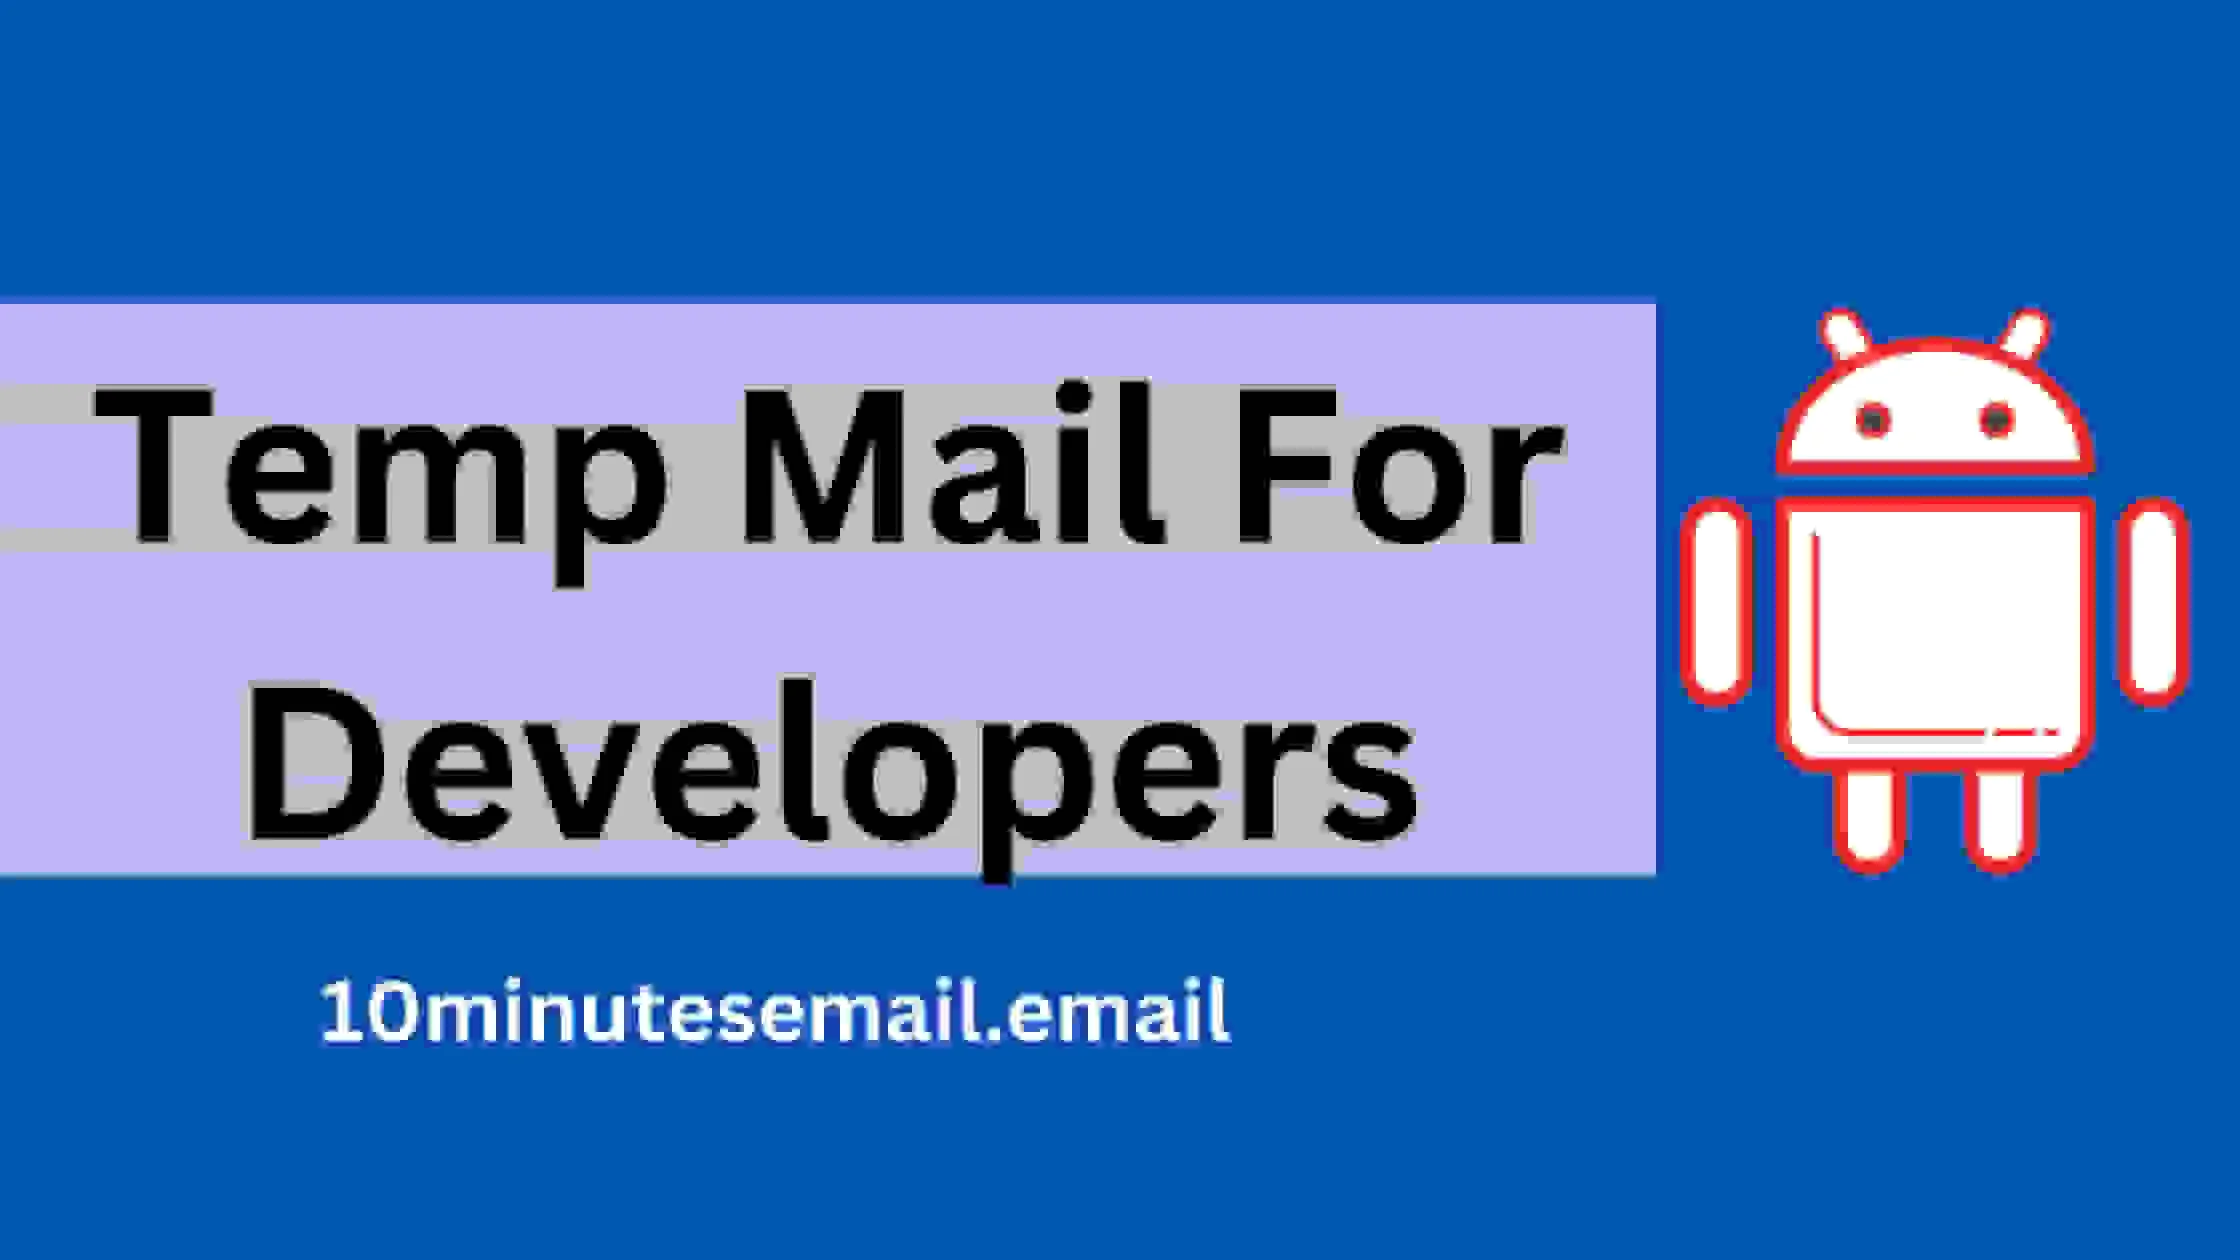 How 10 Minutes Email Temp Mail Can Be Helpful For Software Developers in Testing